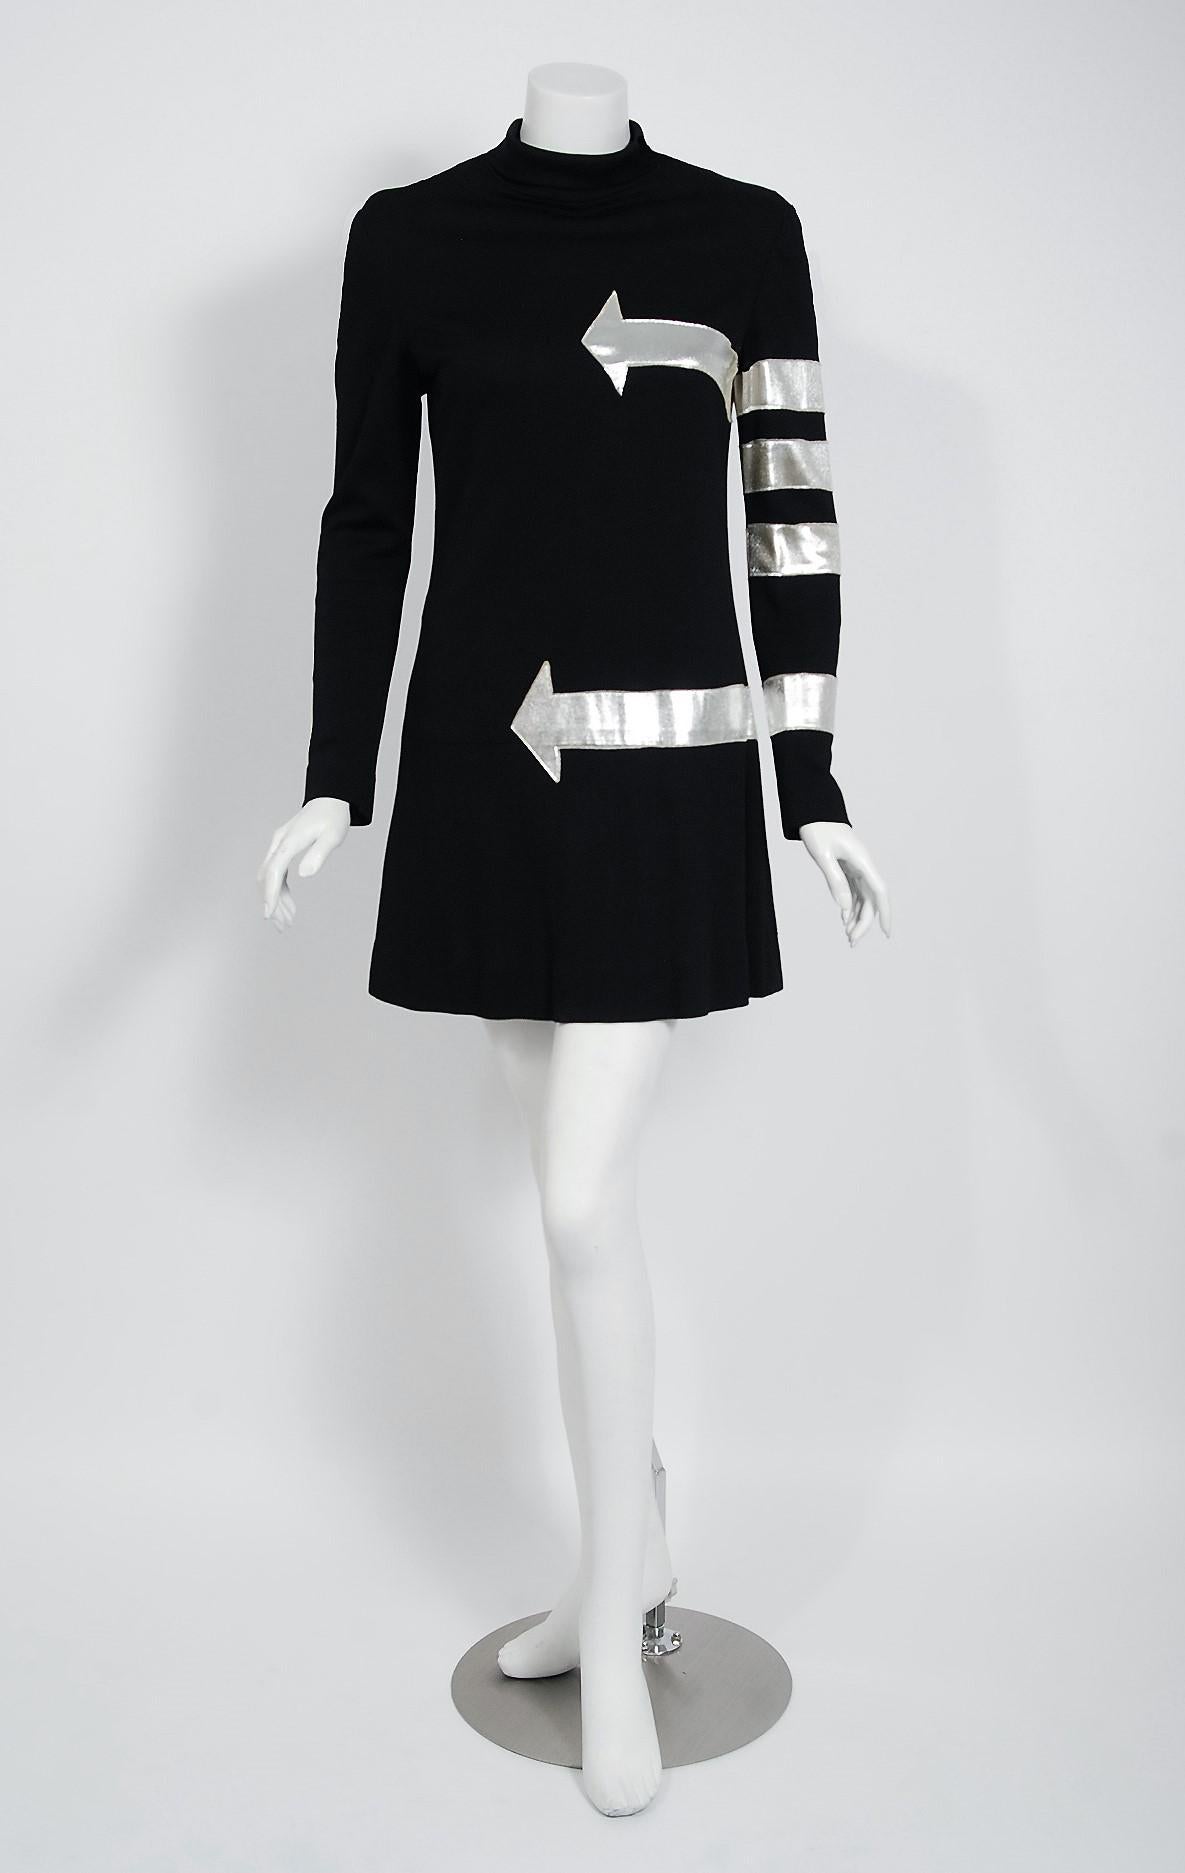 Sensational Michael Mott for Paraphernalia silver arrows novelty mod dress dating back to the late 1960's. Michael Mott was one of the few young designers hired by this chic New York boutique, starting in 1965. Taking his cues from the more